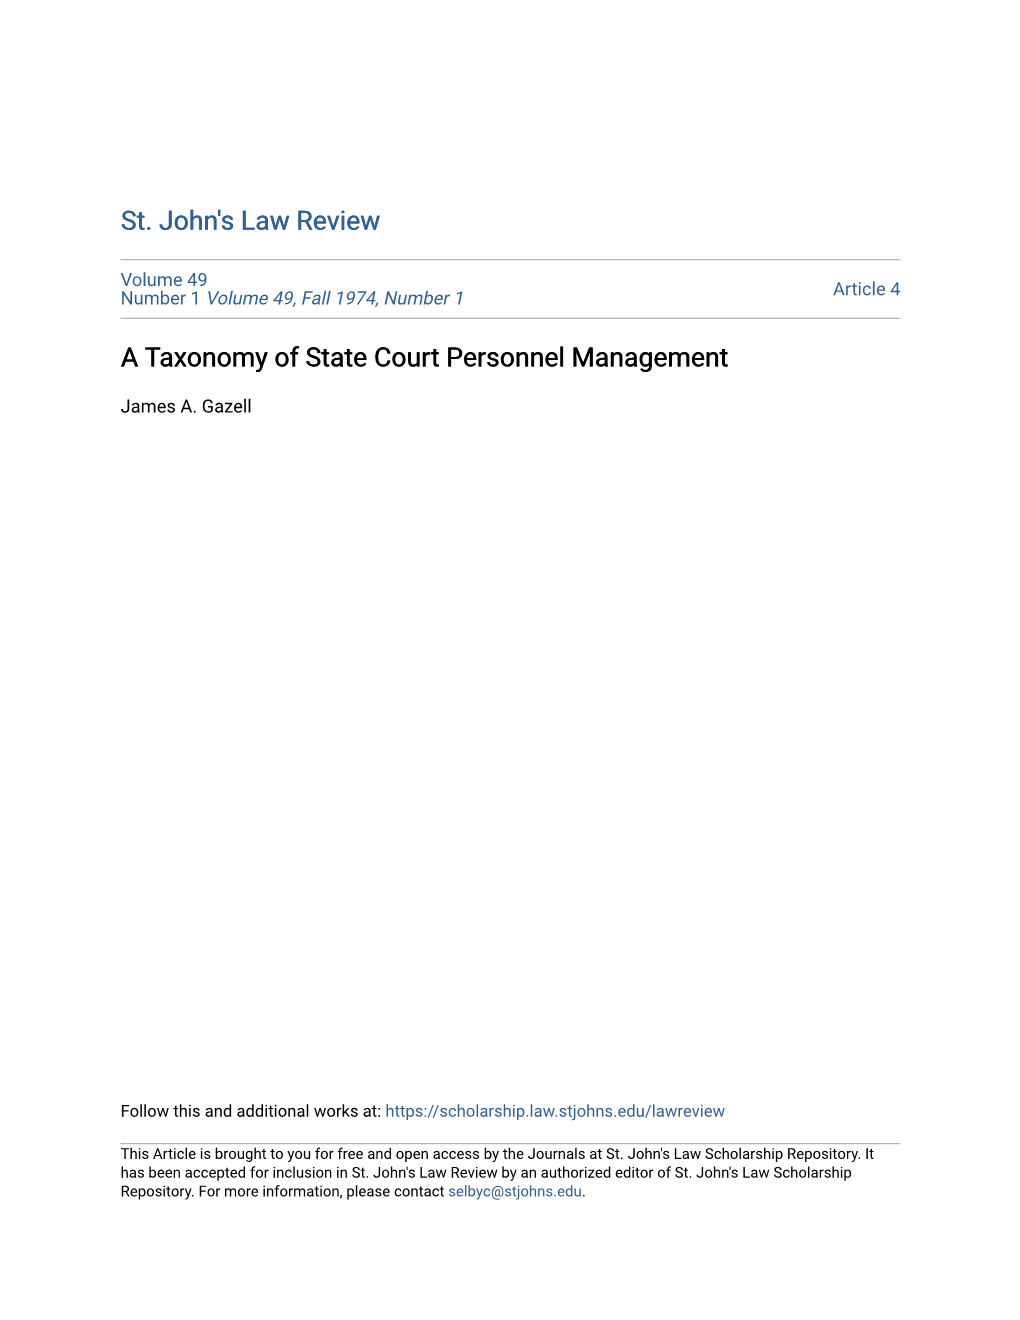 A Taxonomy of State Court Personnel Management